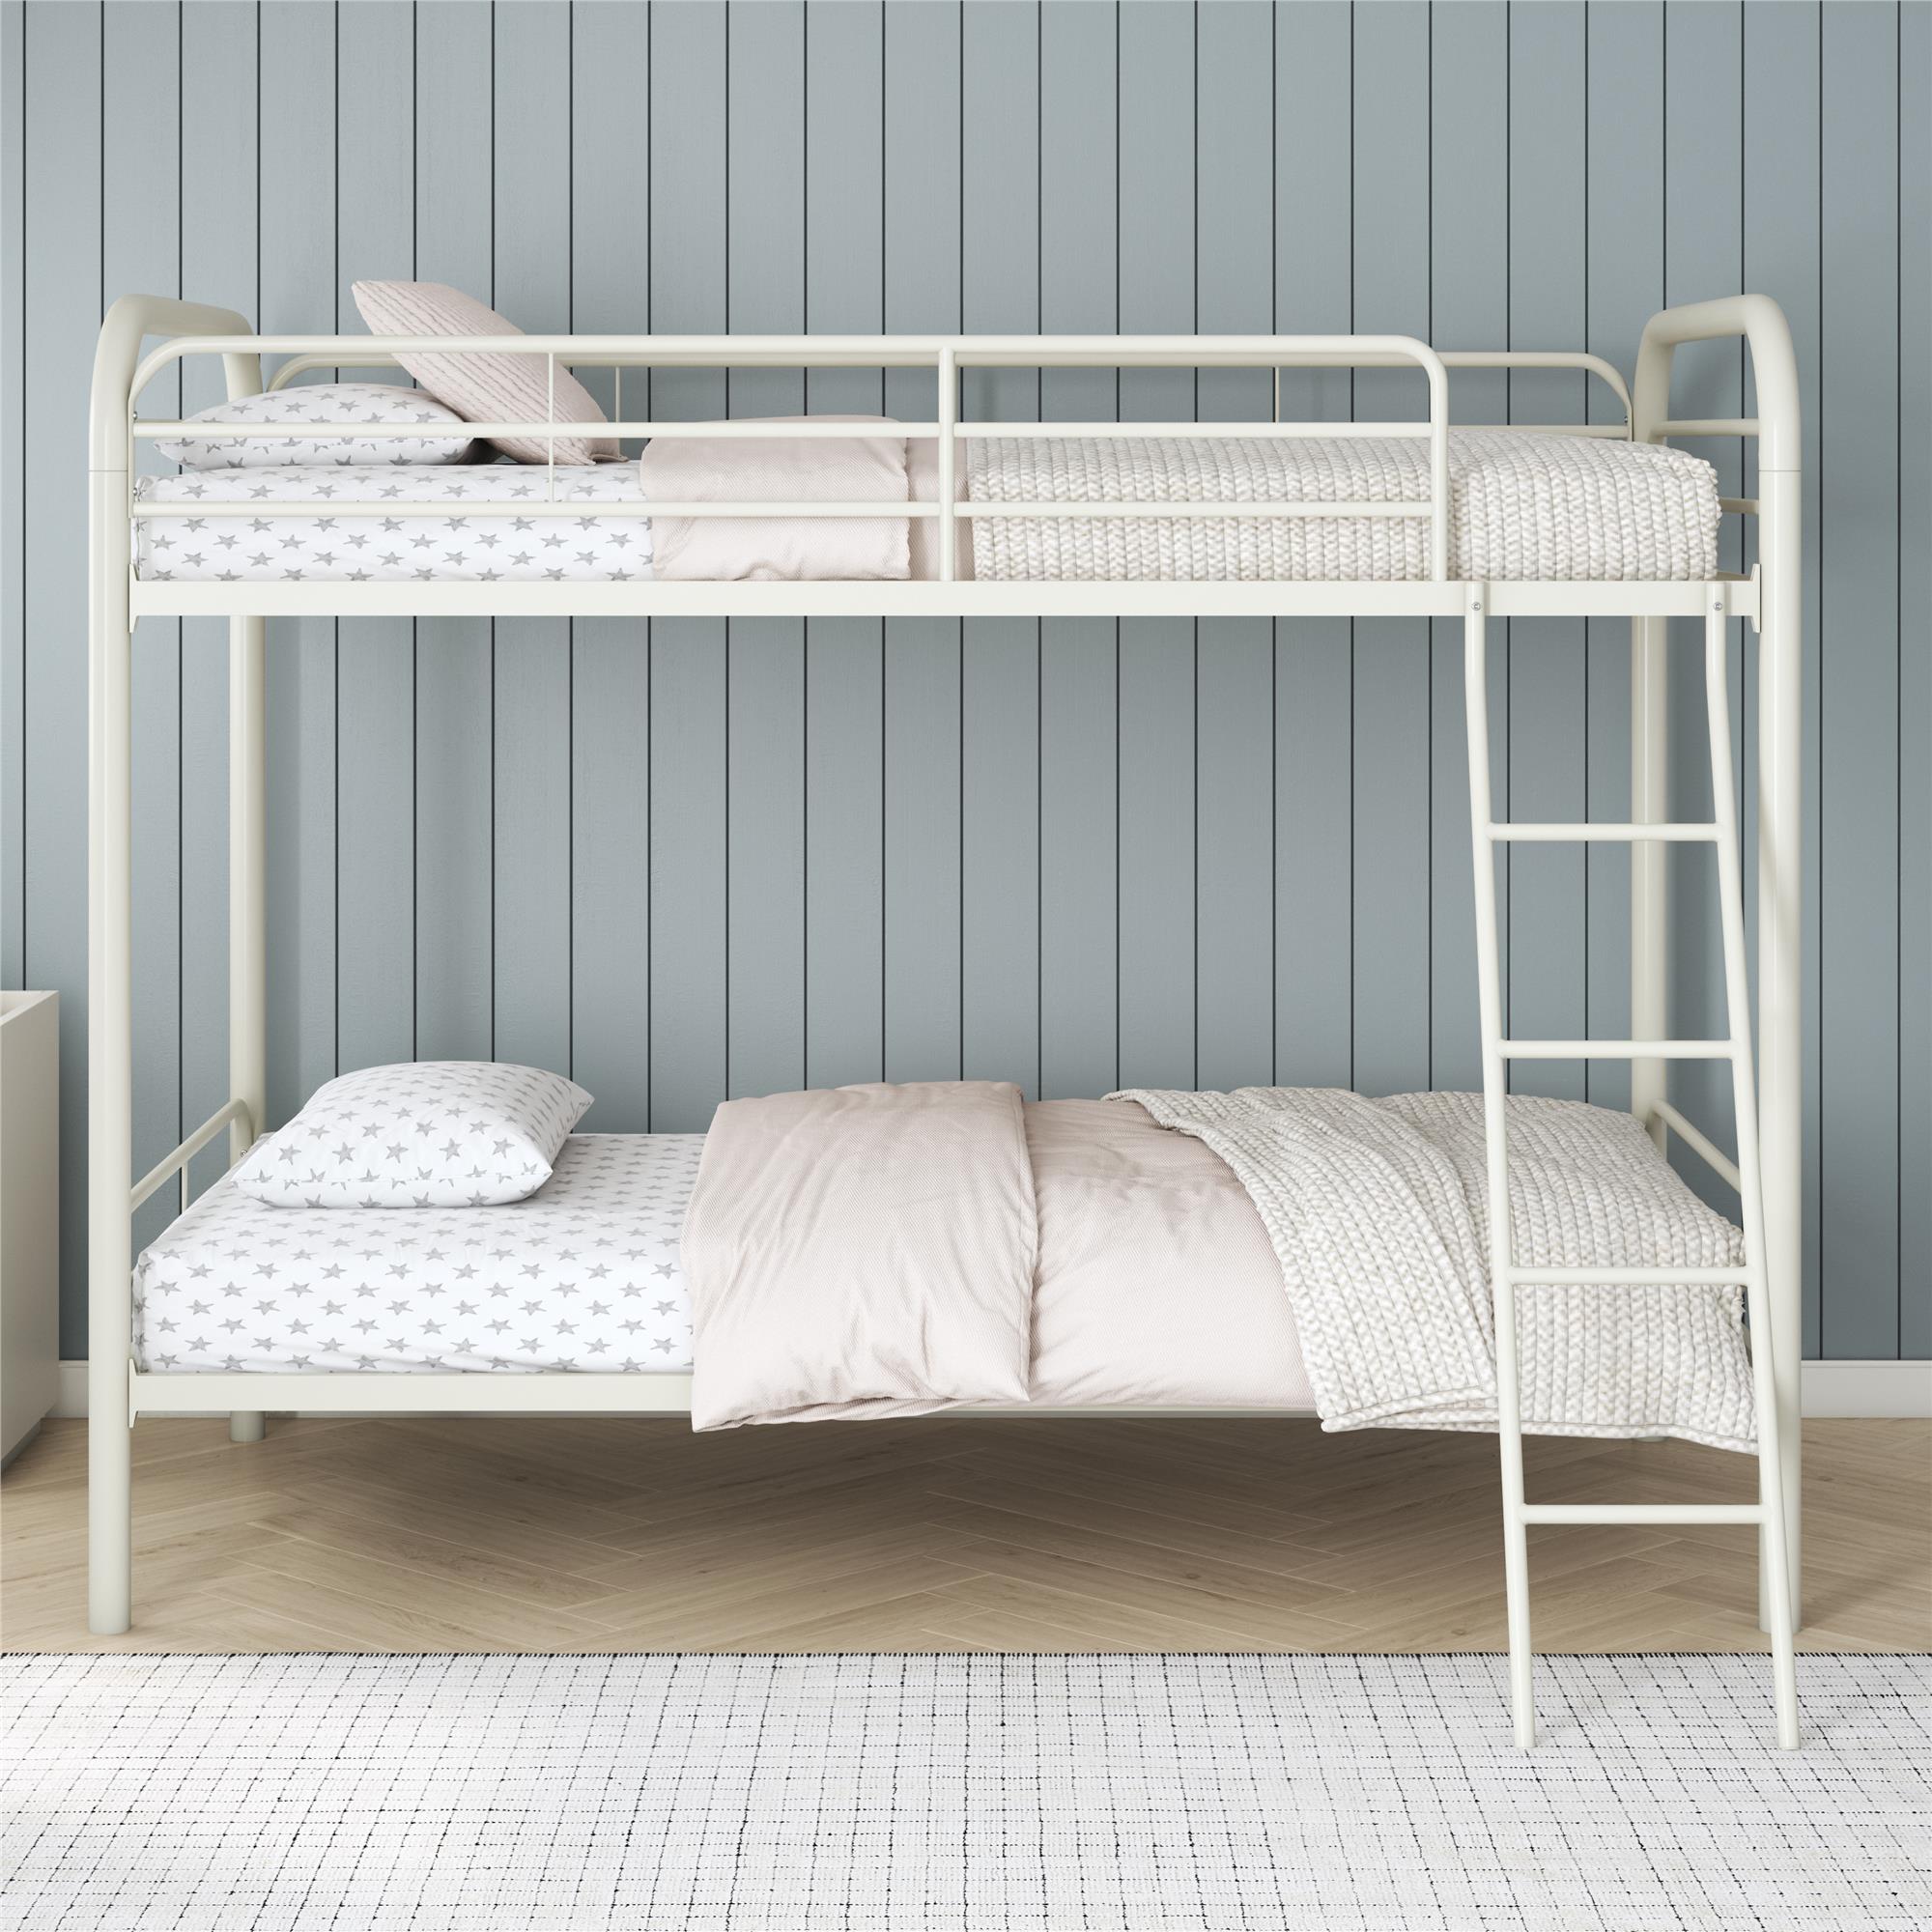 DHP Dusty Twin over Twin Metal Bunk Bed with Secured Ladder, Off White - image 1 of 9